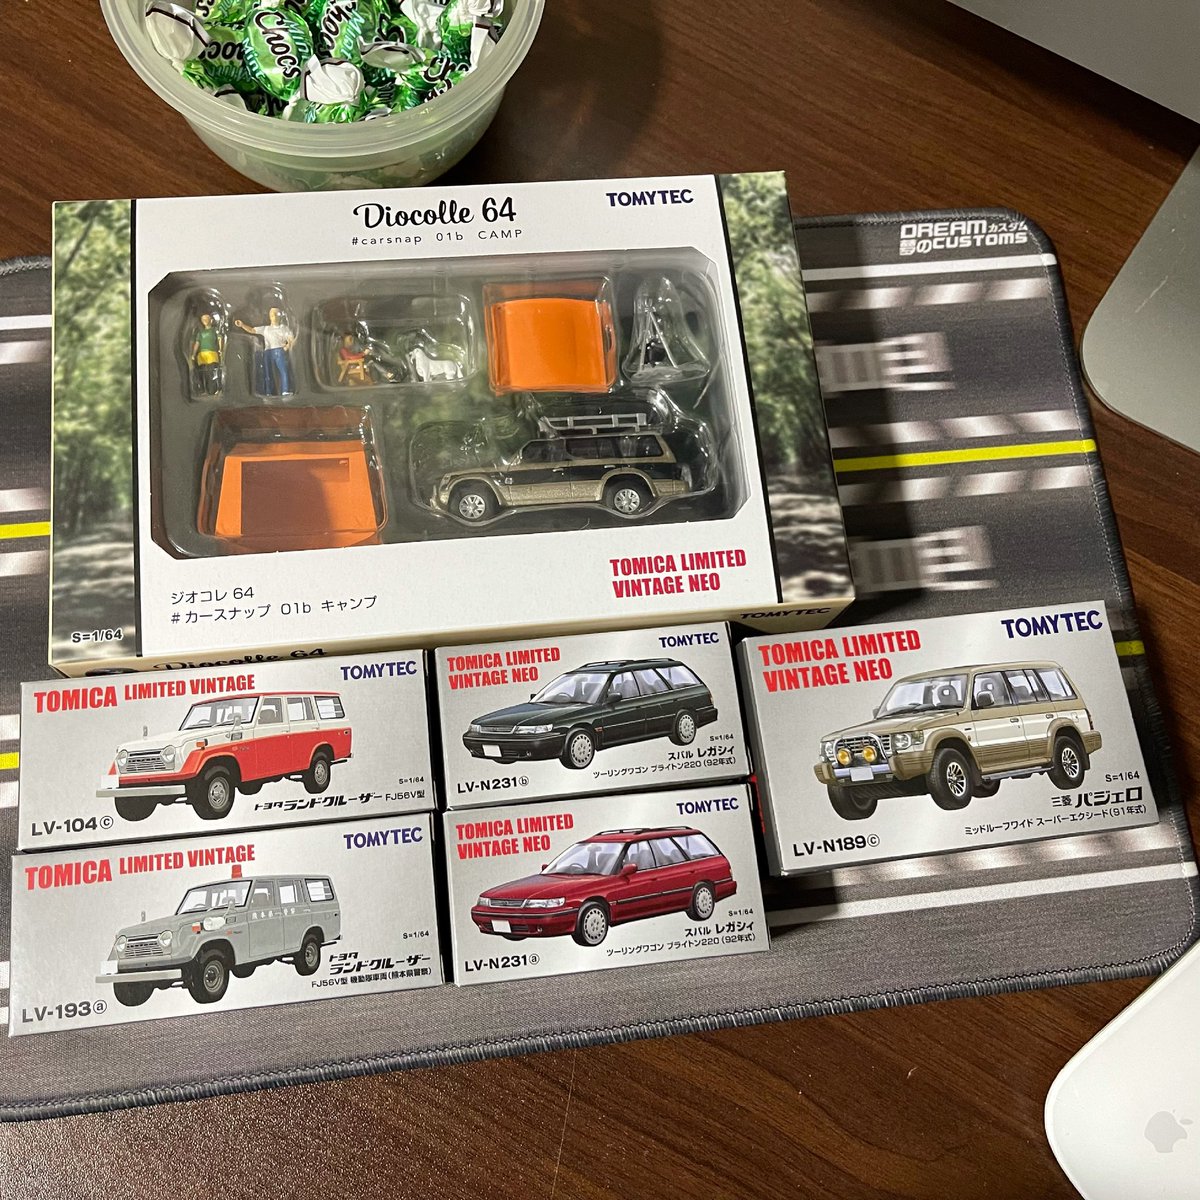 Recent TLVN addi(c)tion! Excited about the Land Cruiser!
#トミカ #トミカ博 #tomicalimitedvintage #subarulegacy #mitsubishipajero #diocolle64